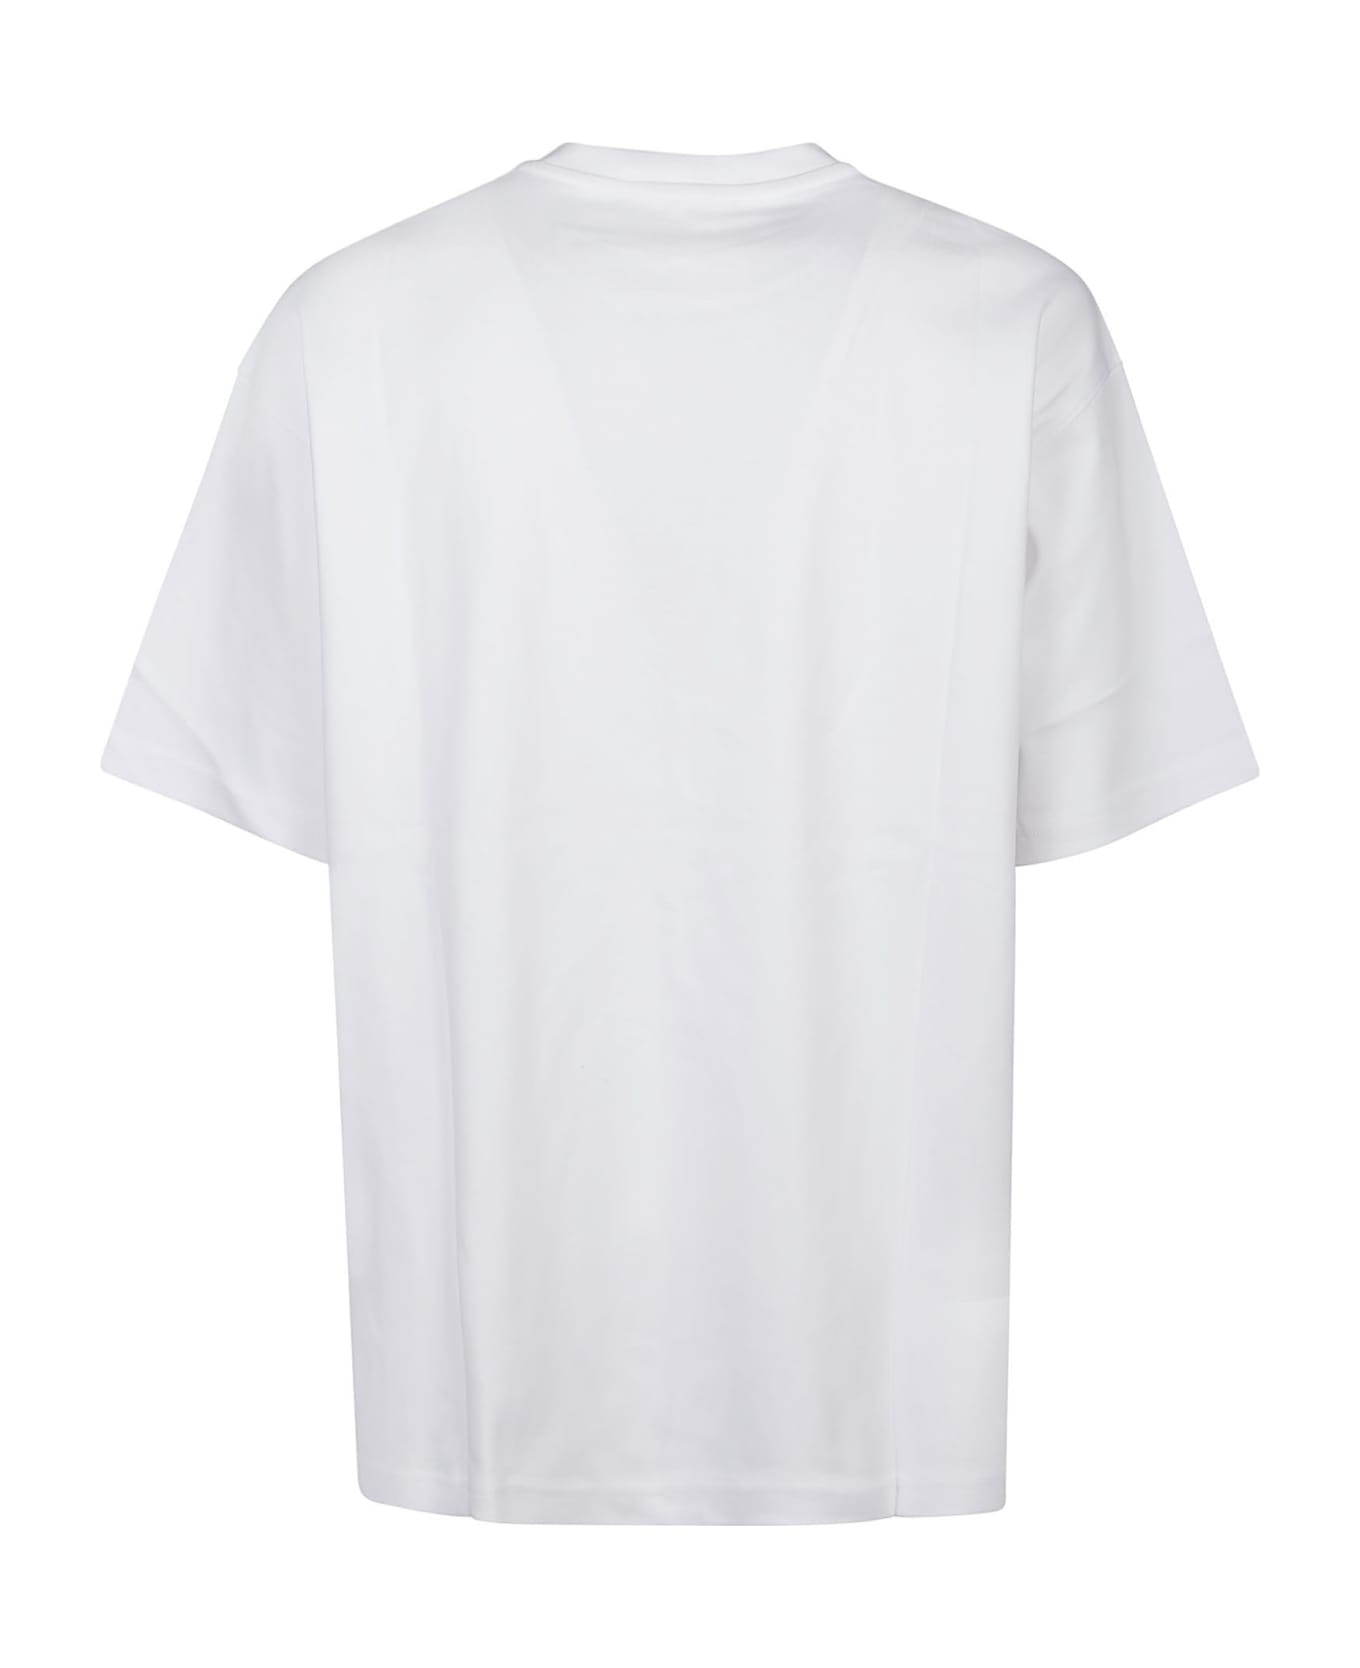 Versace Jeans Couture Logo Dripping T-shirt - White シャツ